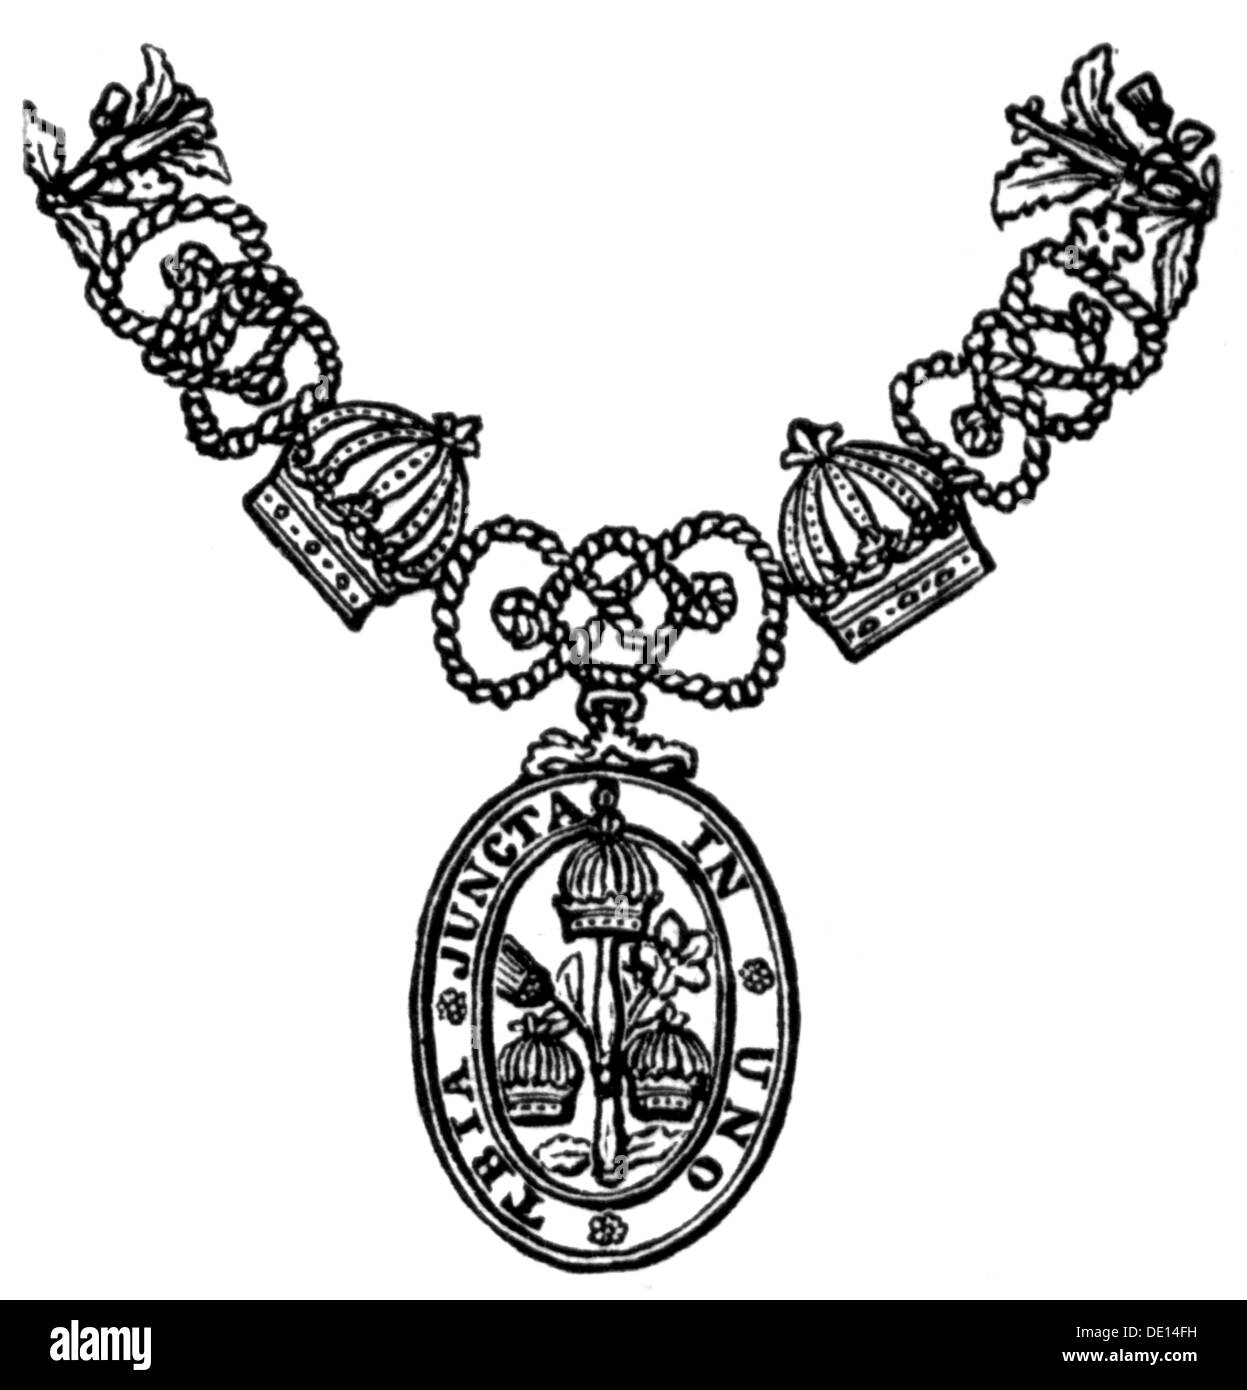 medals and decorations, Great Britain, Order of the Bath, founded 1399 by King Henry IV of England, badge and part of the collar of the Knight Grand Cross, wood engraving, 2nd half 19th century, Order of Chivalry, chivalric order, orders of merit, cross, crosses, collar, United kingdom of Great Britain and Ireland, British Empire, historic, historical, Additional-Rights-Clearences-Not Available Stock Photo